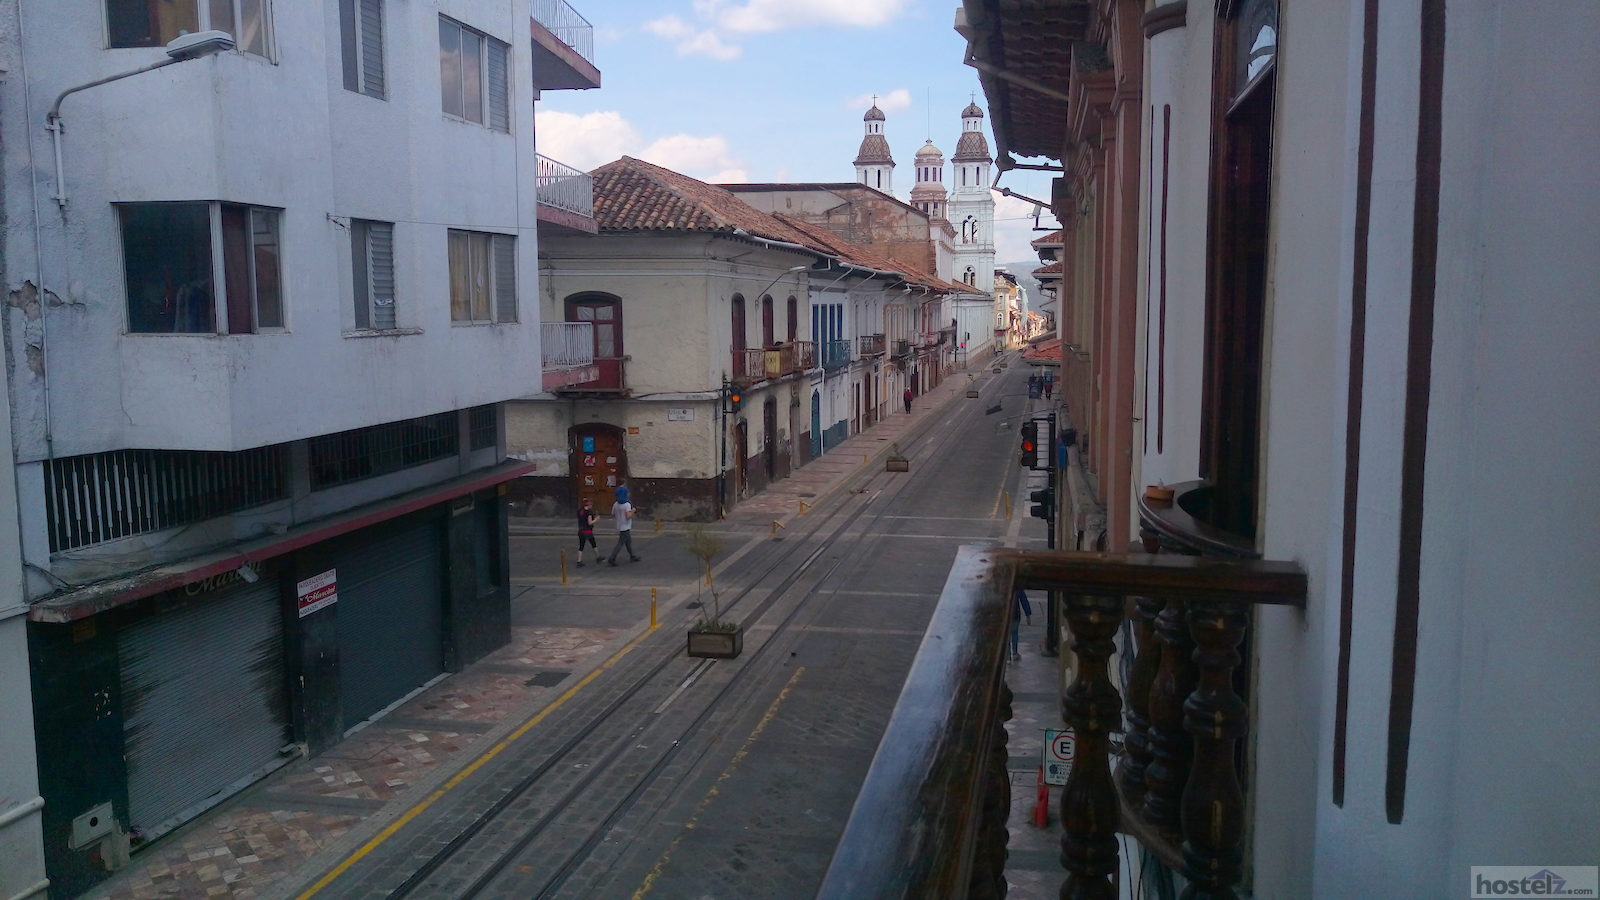 A view of the street from a dormitory room.